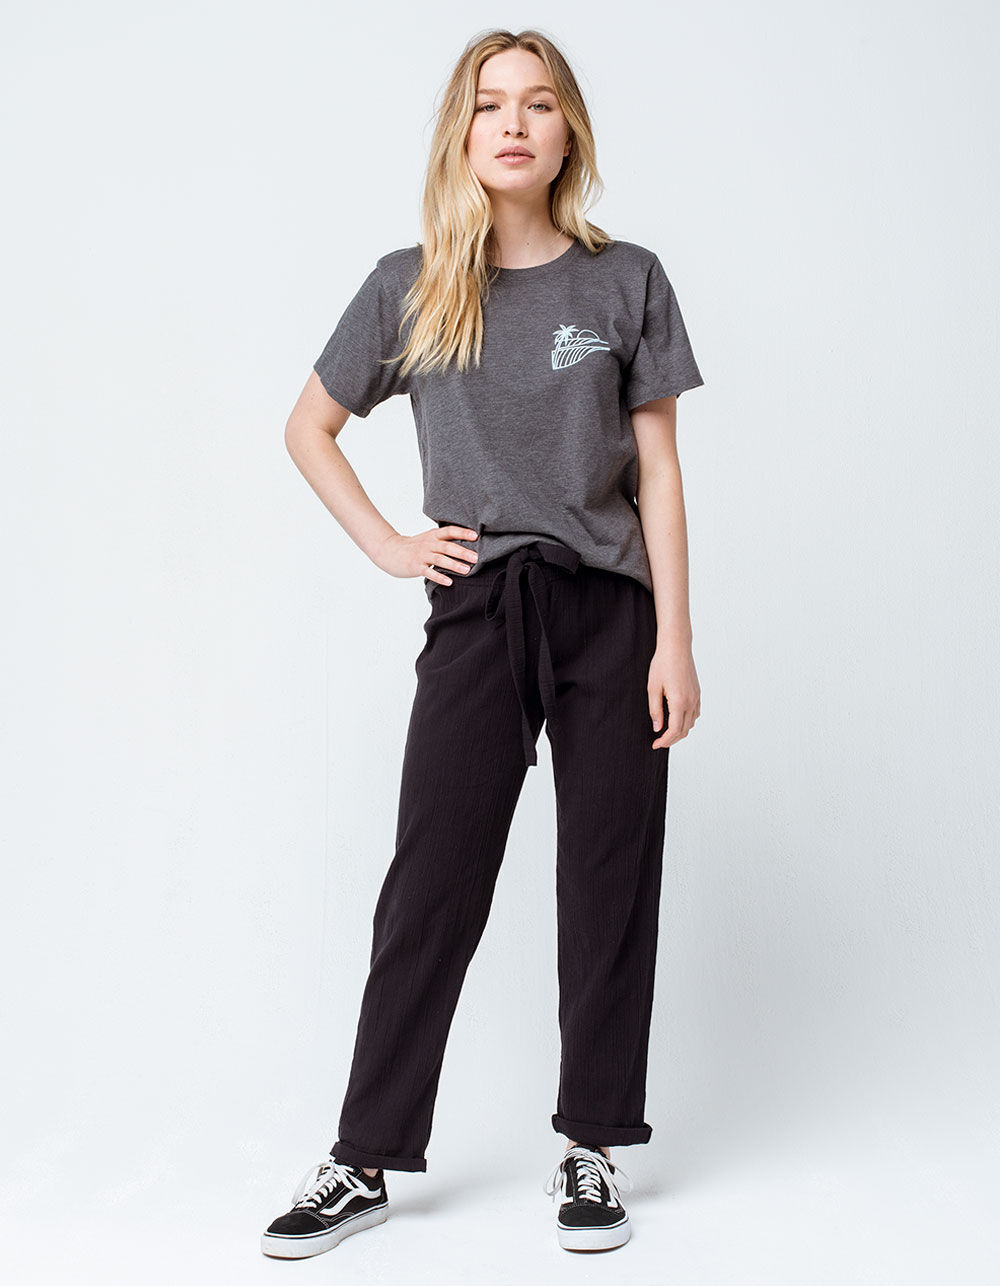 O'NEILL Waves Charcoal Womens Tee - CHARCOAL | Tillys